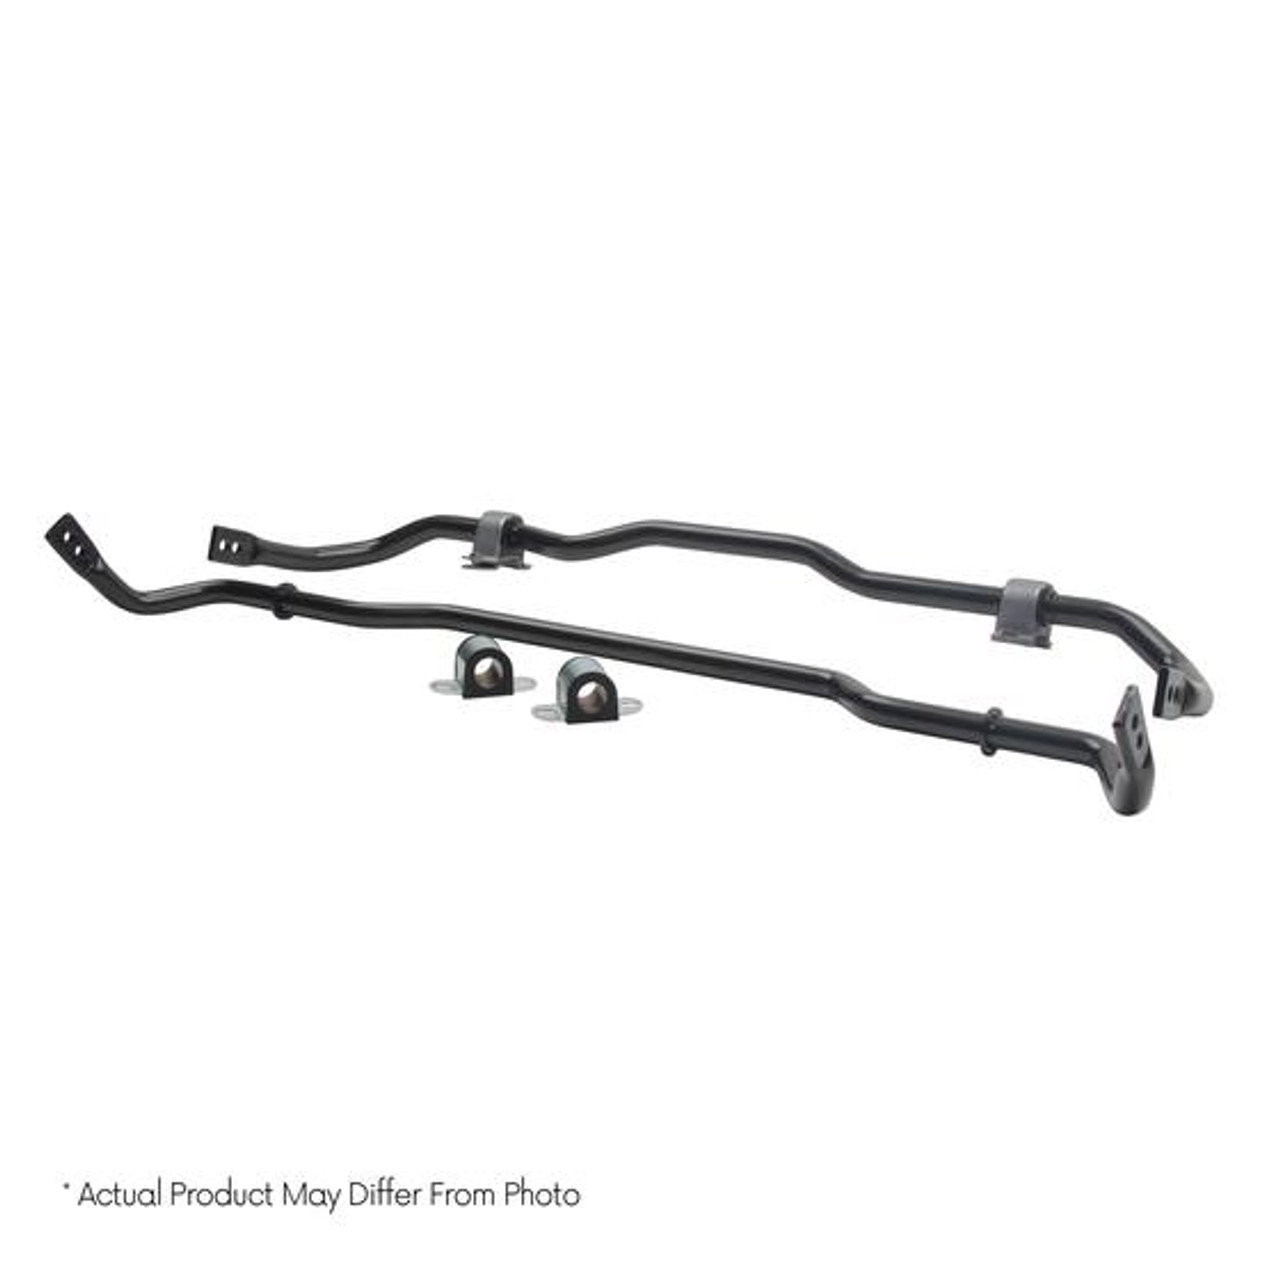 BMW Front and Rear Anti-Sway Bar Kit - ST Suspensions 52306